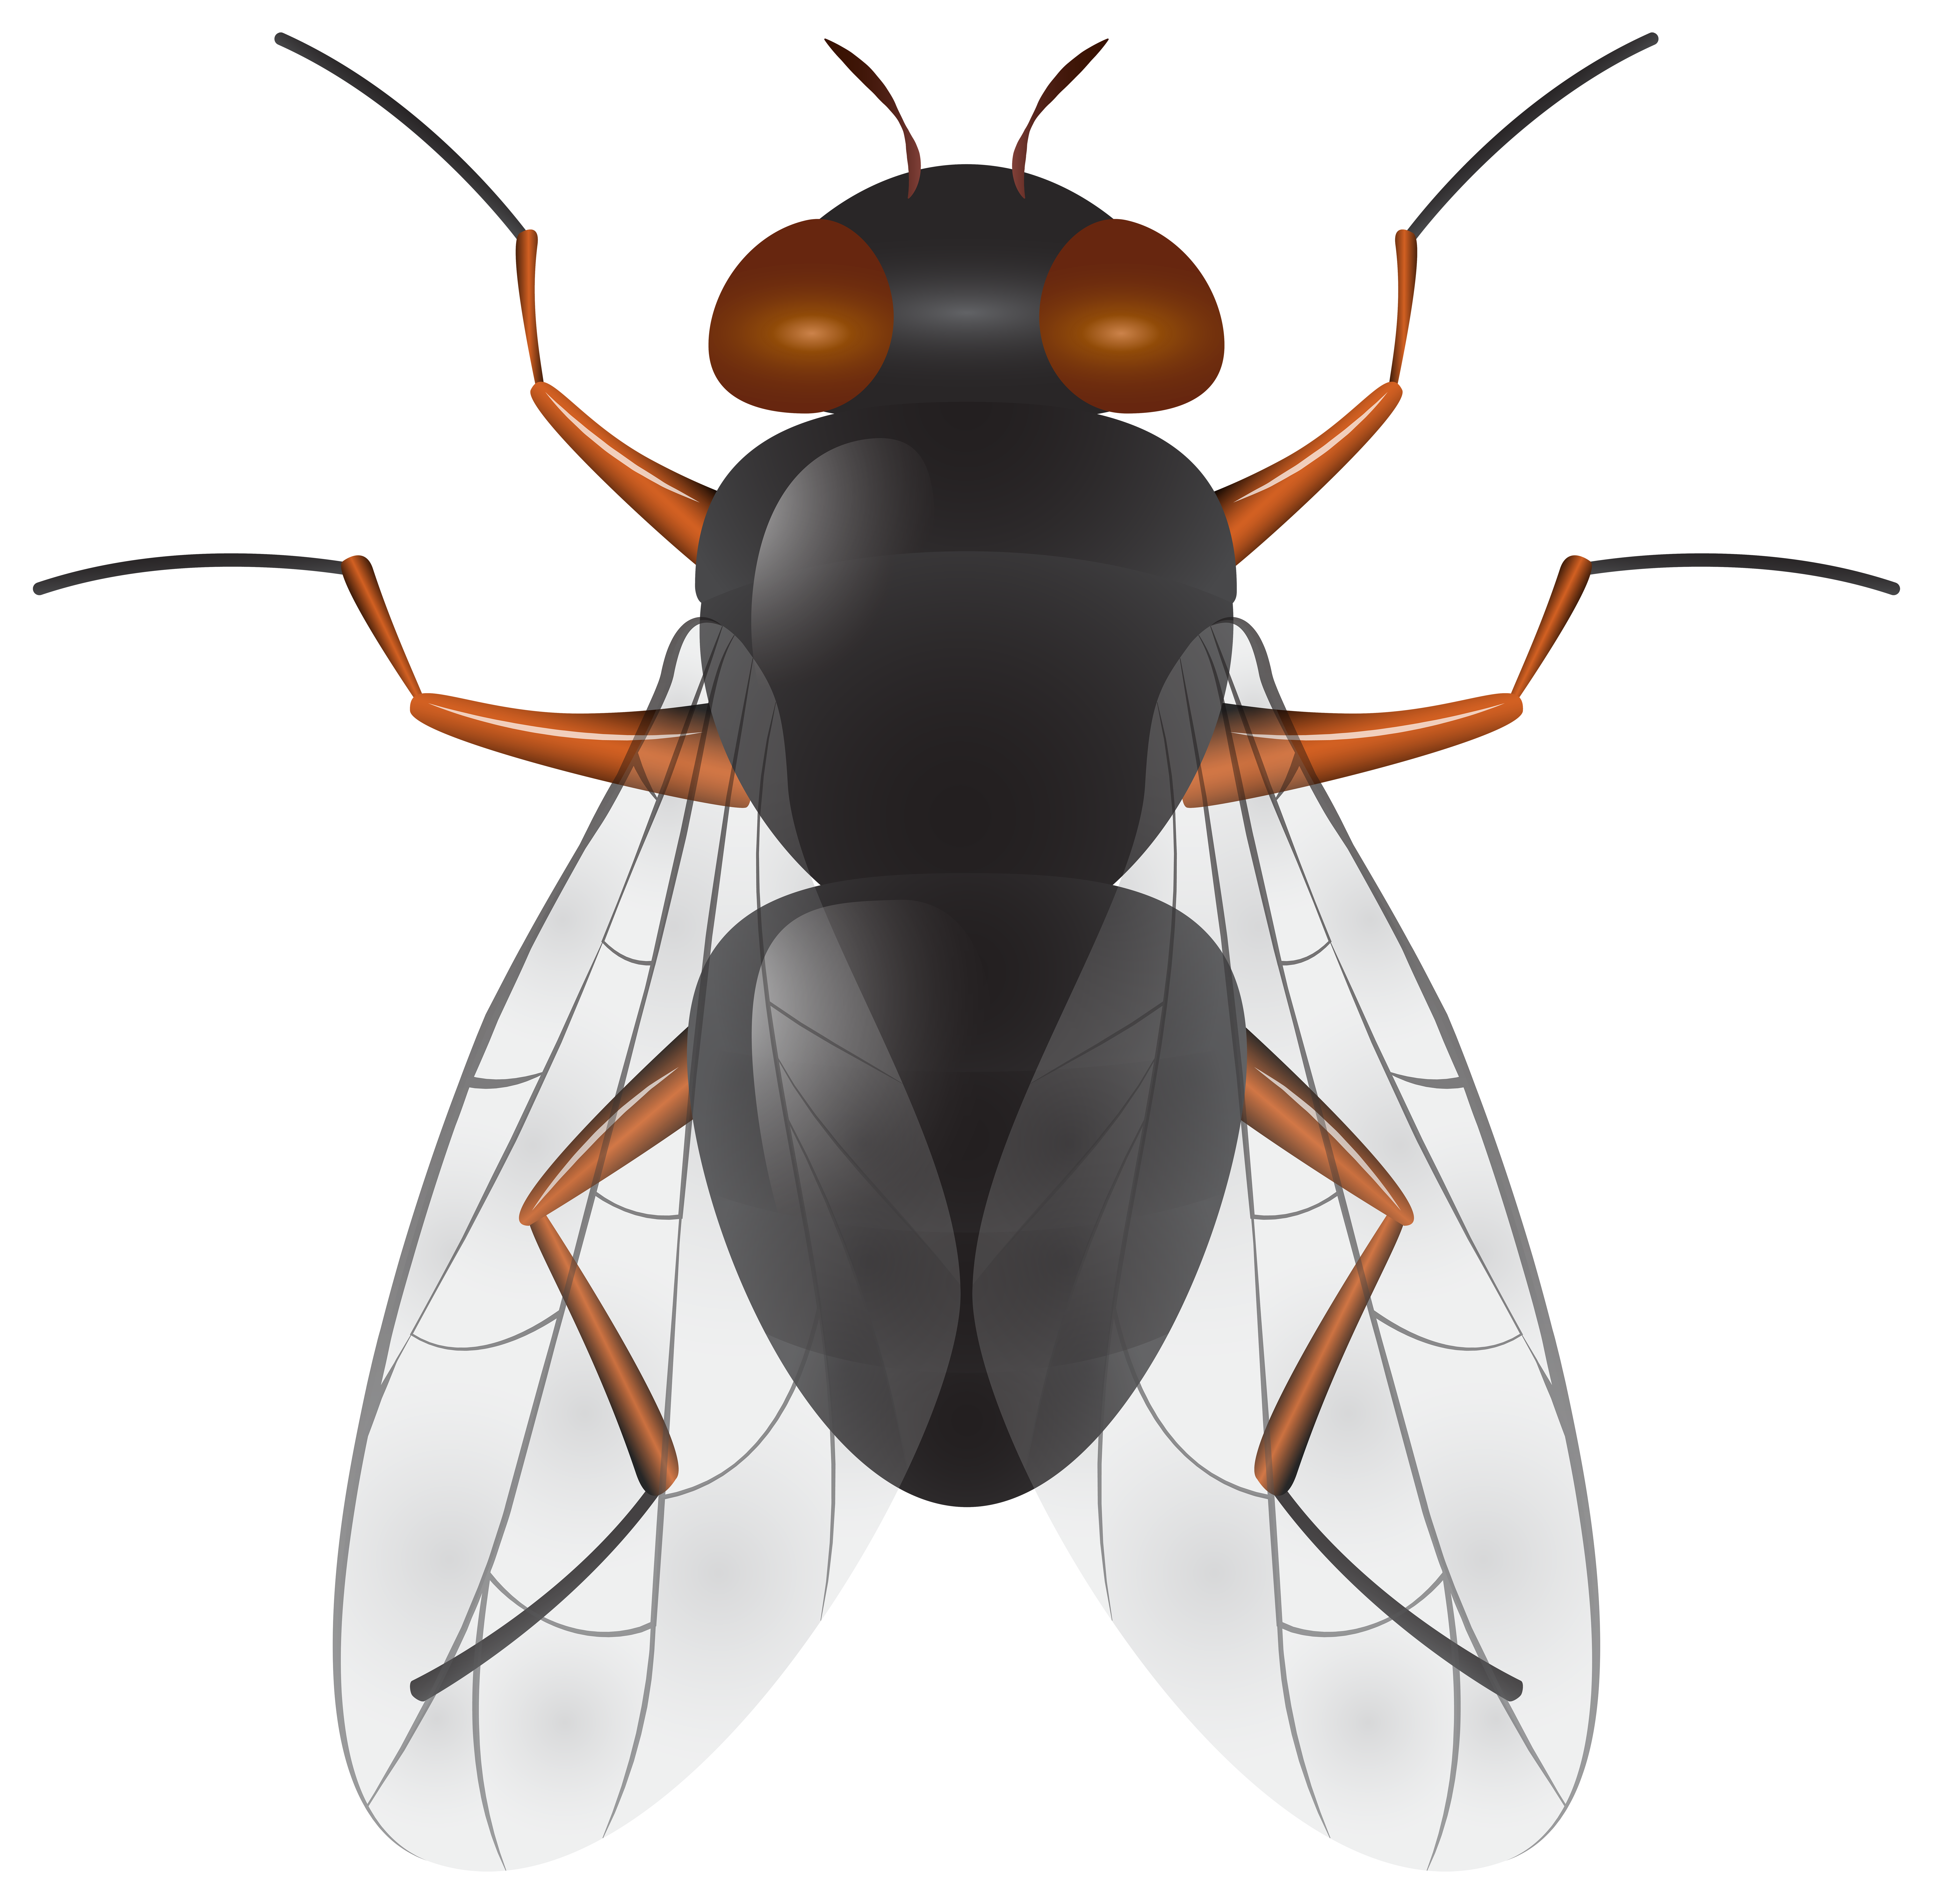 fly images clip art - photo #43